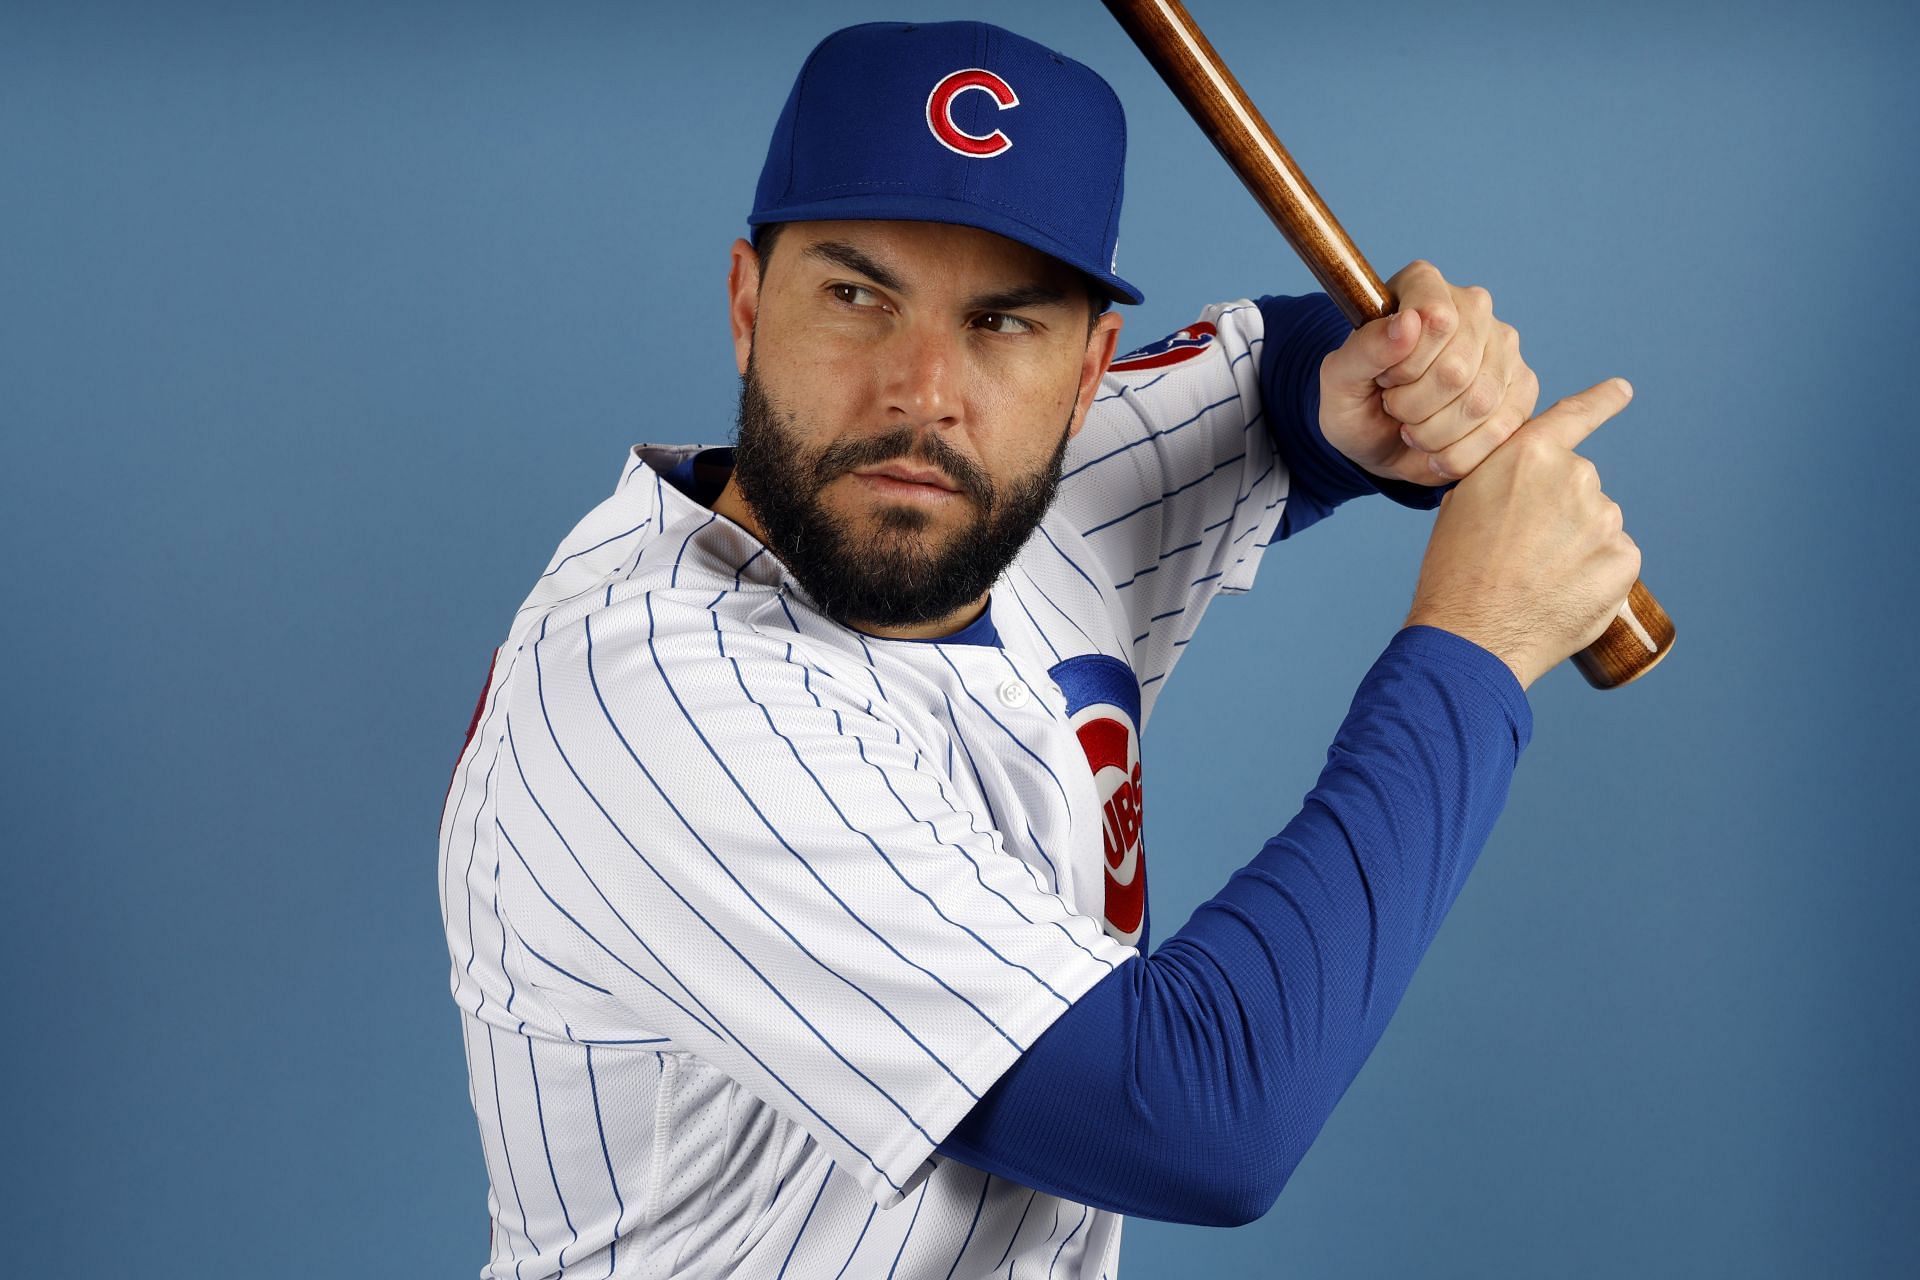 Chicago Cubs Photo Day: Eric Hosmer (51) of the Chicago Cubs poses for a portrait during photo day at Sloan Park on February 23, 2023, in Mesa, Arizona. (Photo by Chris Coduto/Getty Images)